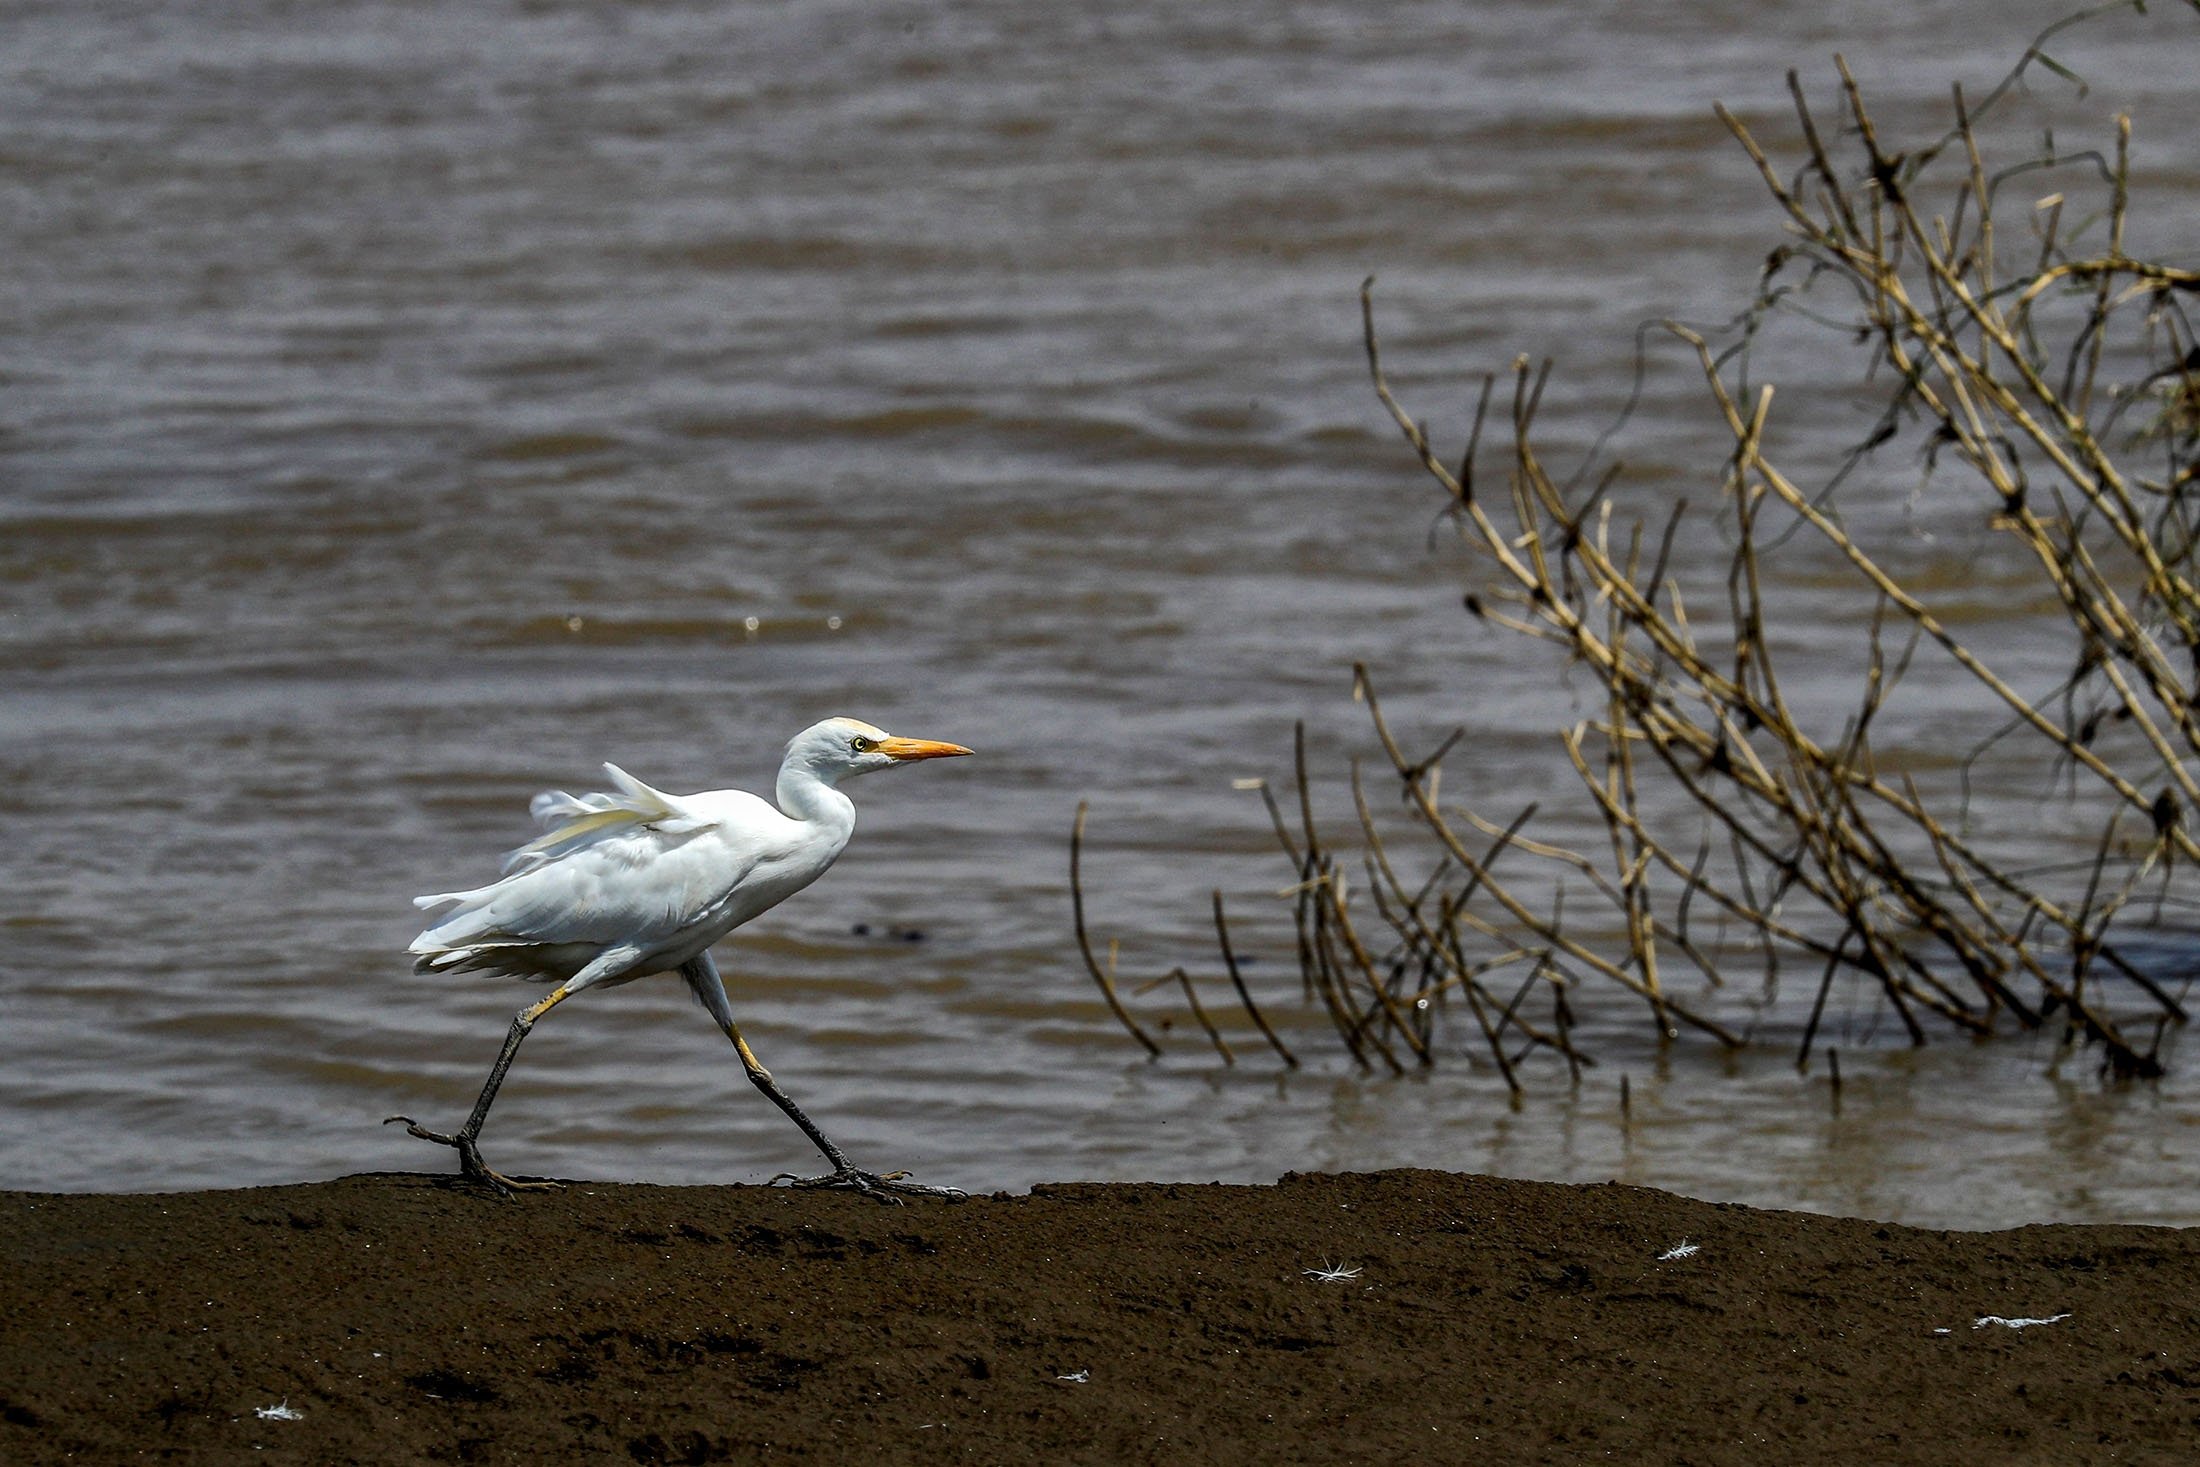 An egret walks along the bank of the Blue Nile river in the Jazirah state, Sudan, Sept. 26, 2022. (AFP Photo)